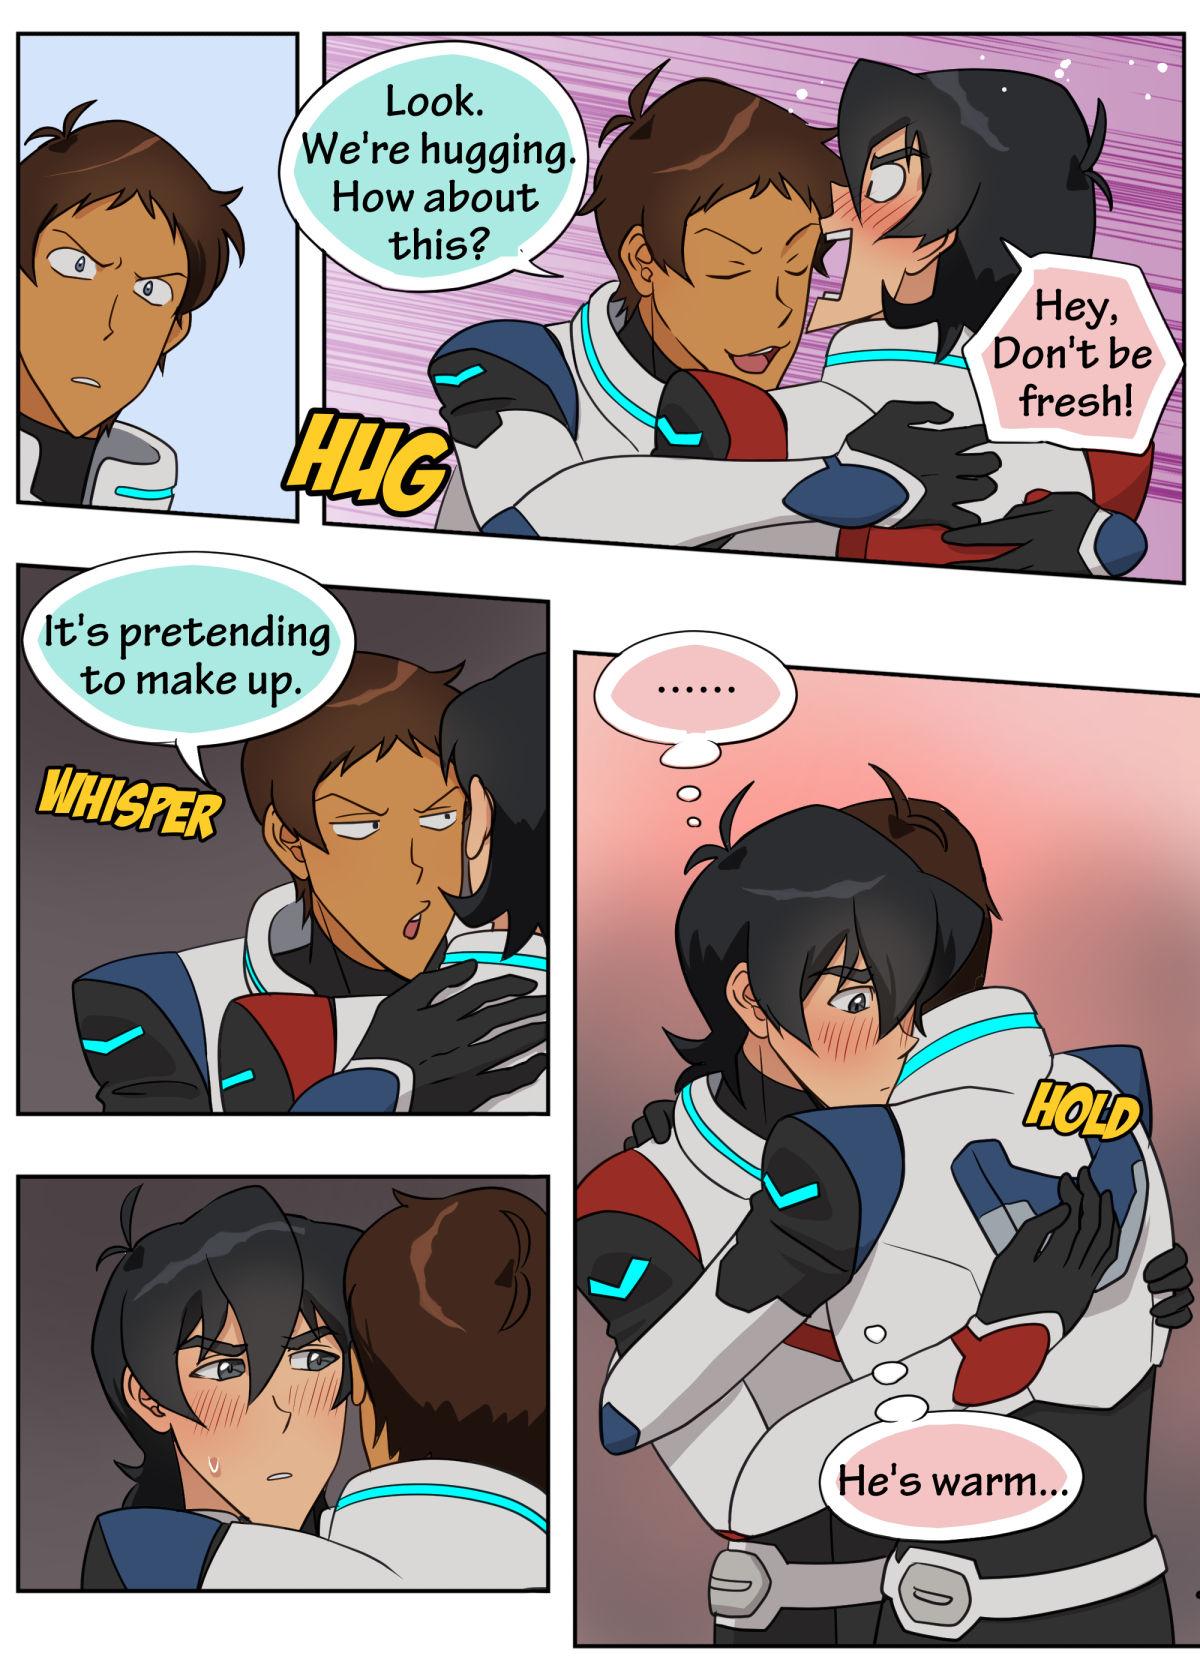 Best Love Remains in Red - Voltron Doublepenetration - Page 13